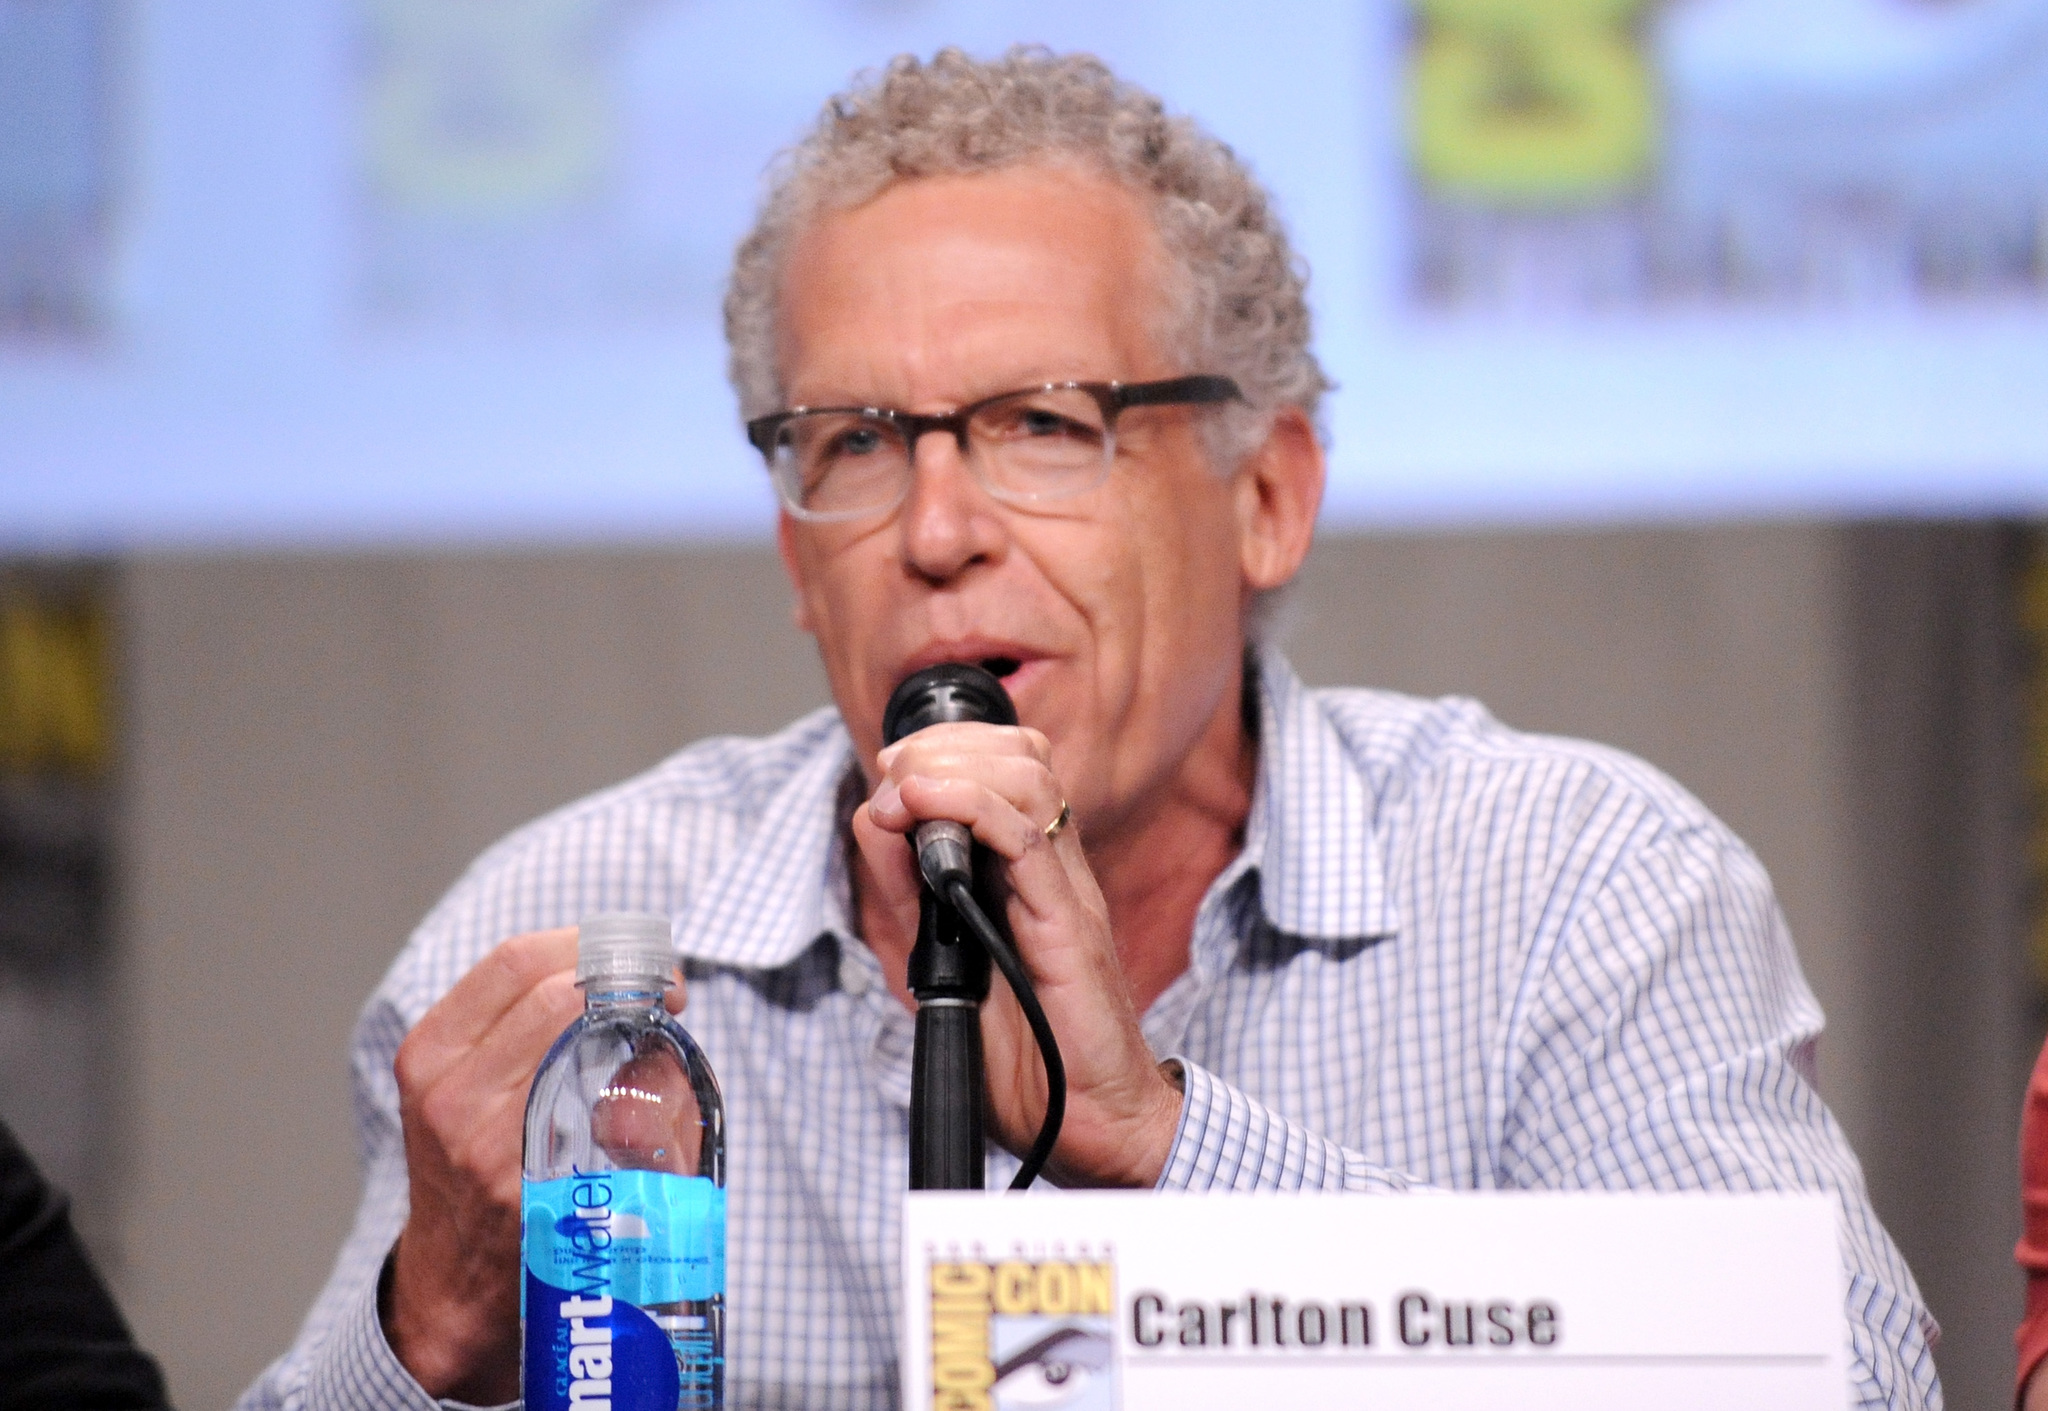 Carlton Cuse at event of The Strain (2014)